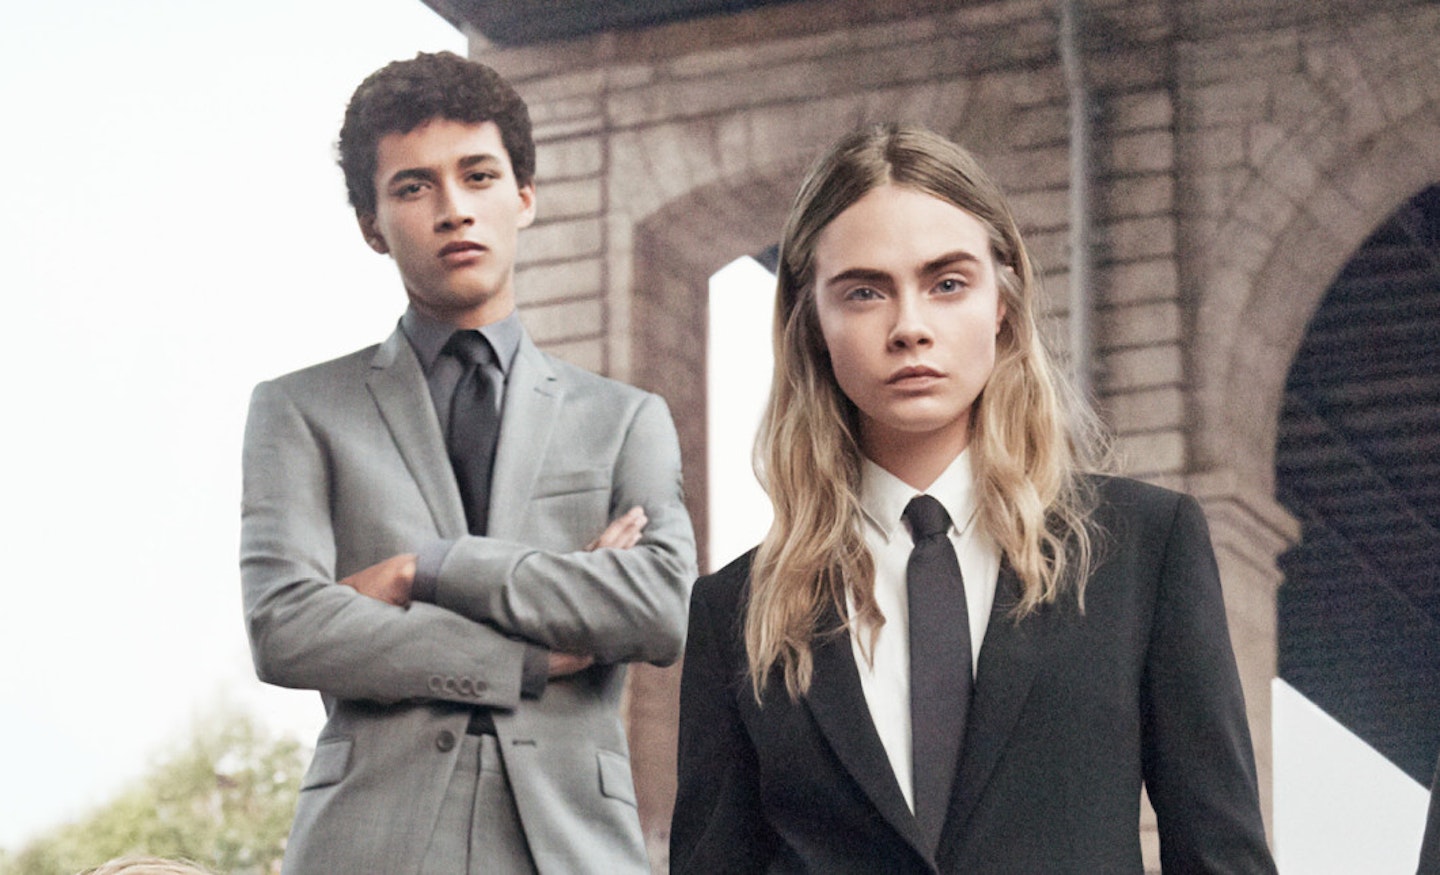 CARA DELEVINGNE STARS IN G-STAR RAW'S NEW FALL CAMPAIGN - Numéro